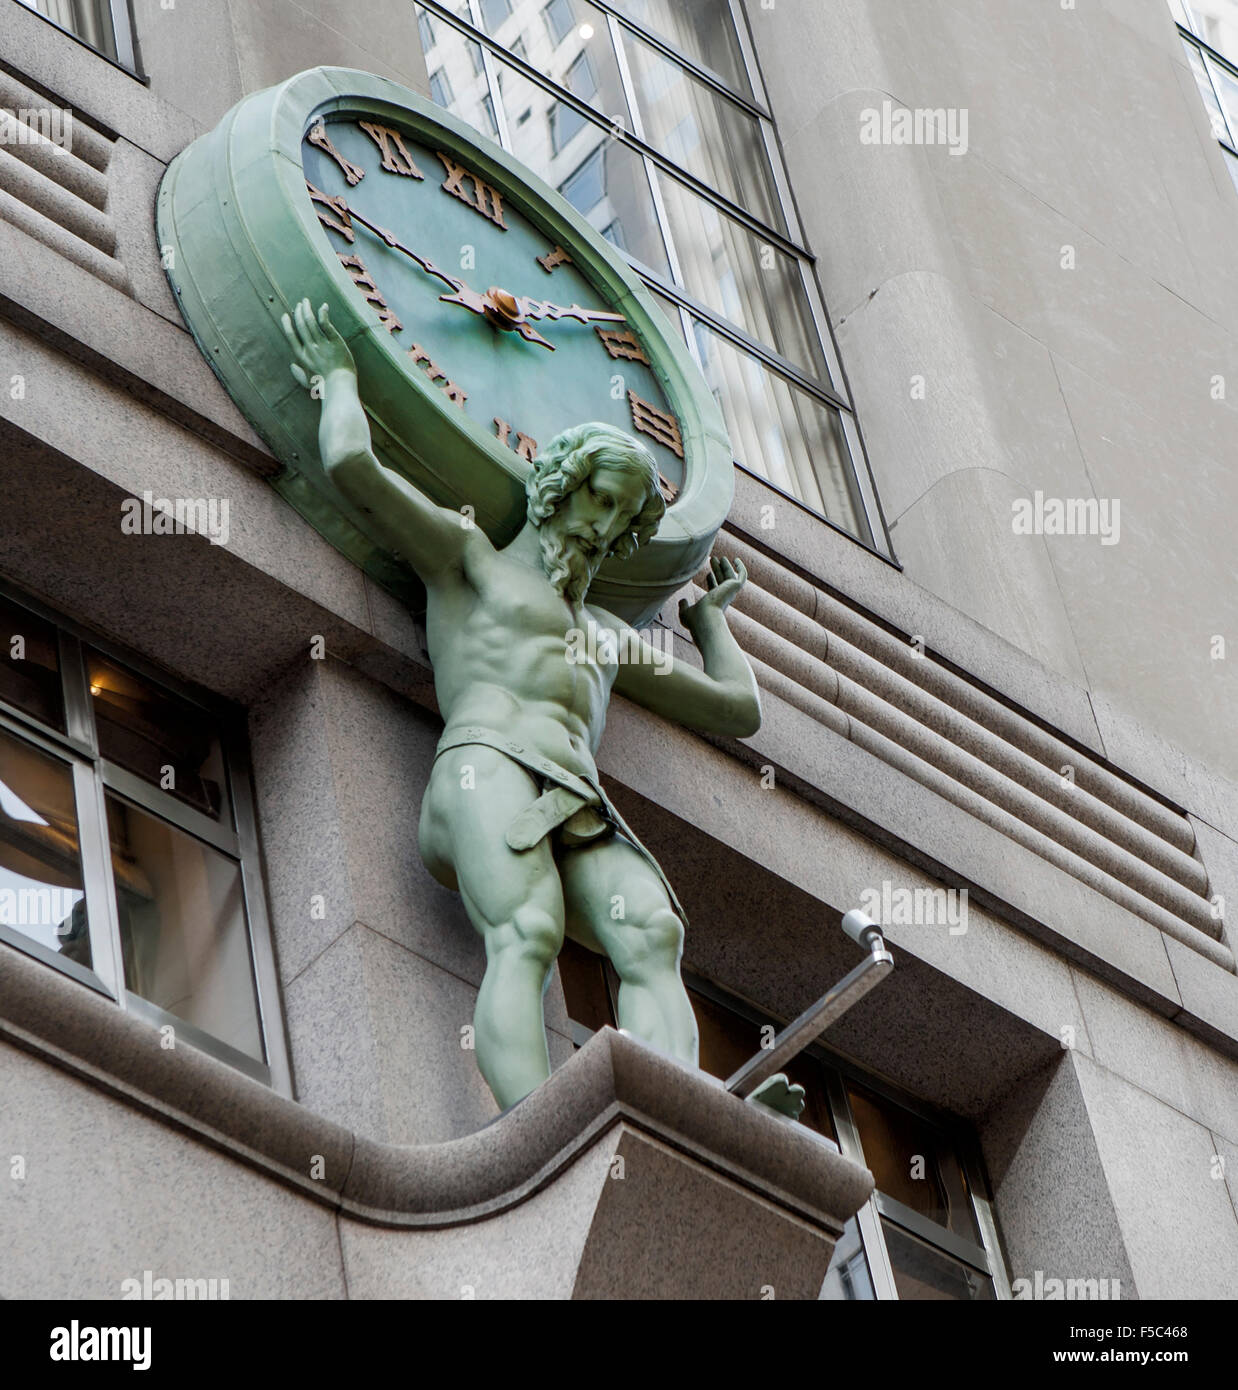 Statue of Man Holding Clock on Shoulders, Tiffany Building, New York City, USA Stock Photo